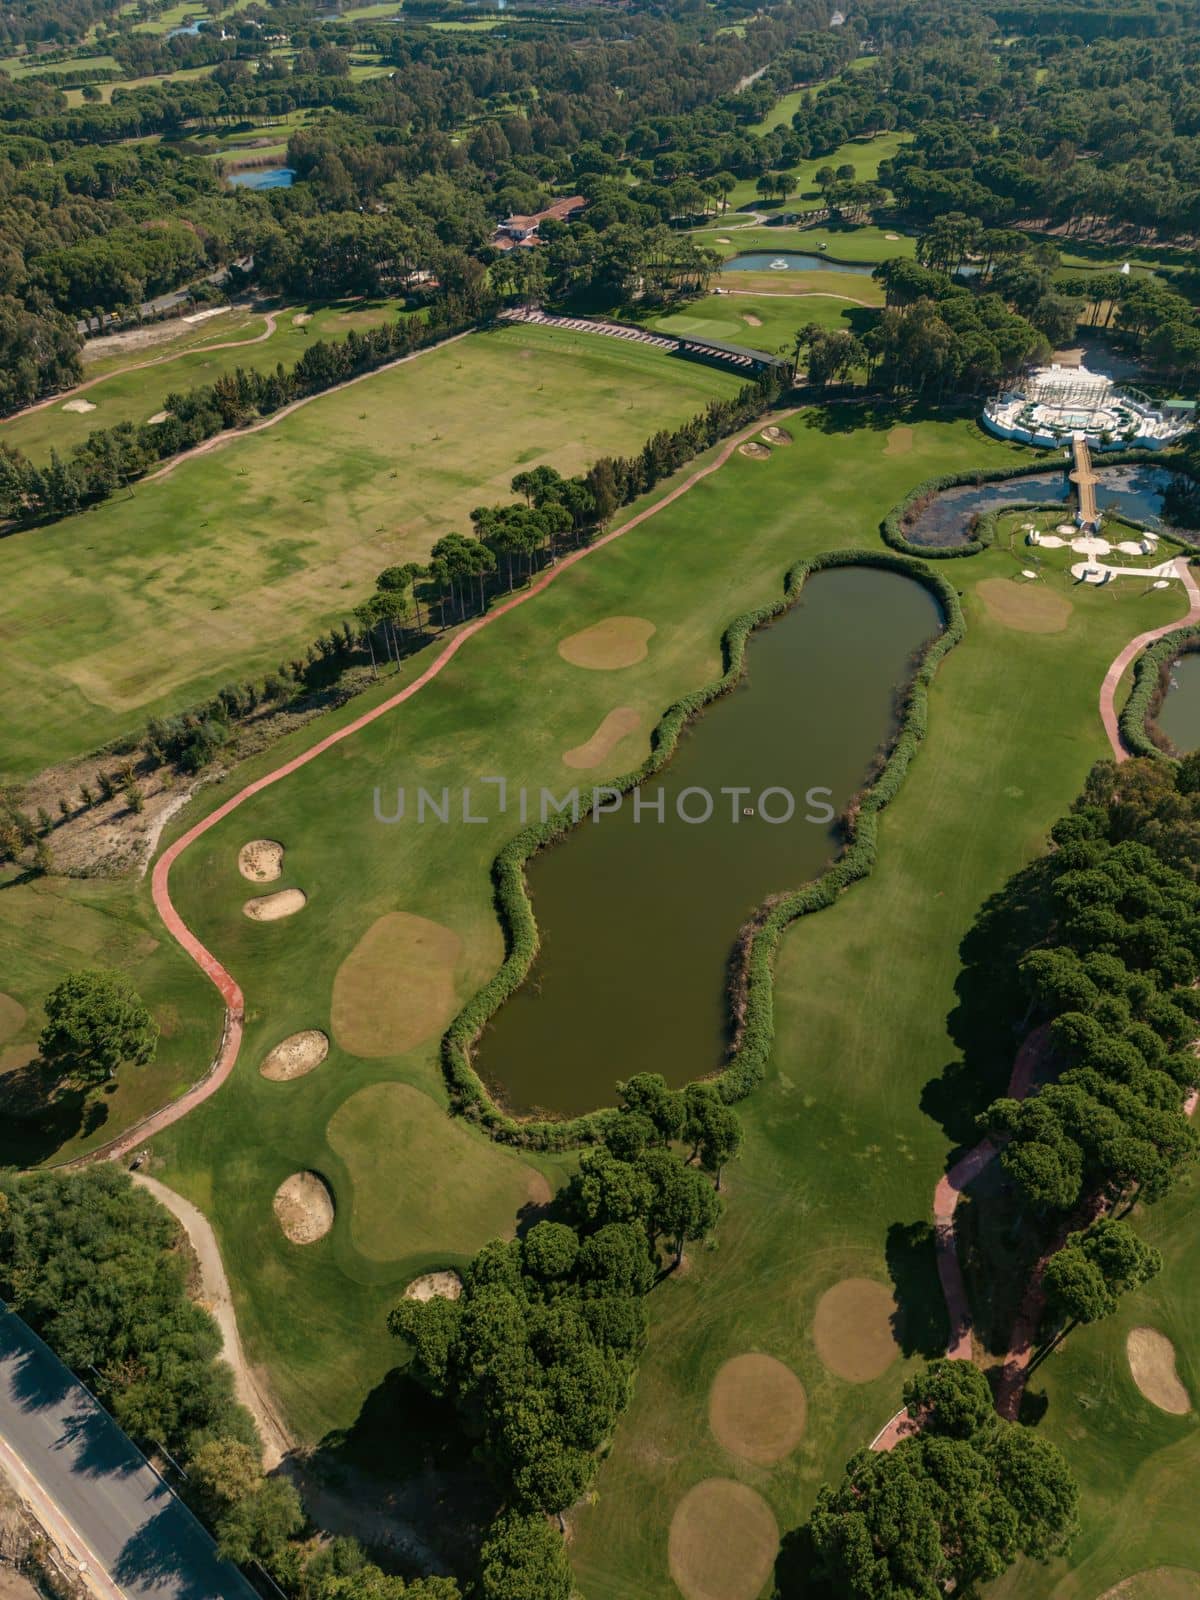 Aerial view of the golf course in Antalya Belek at sunset by Sonat